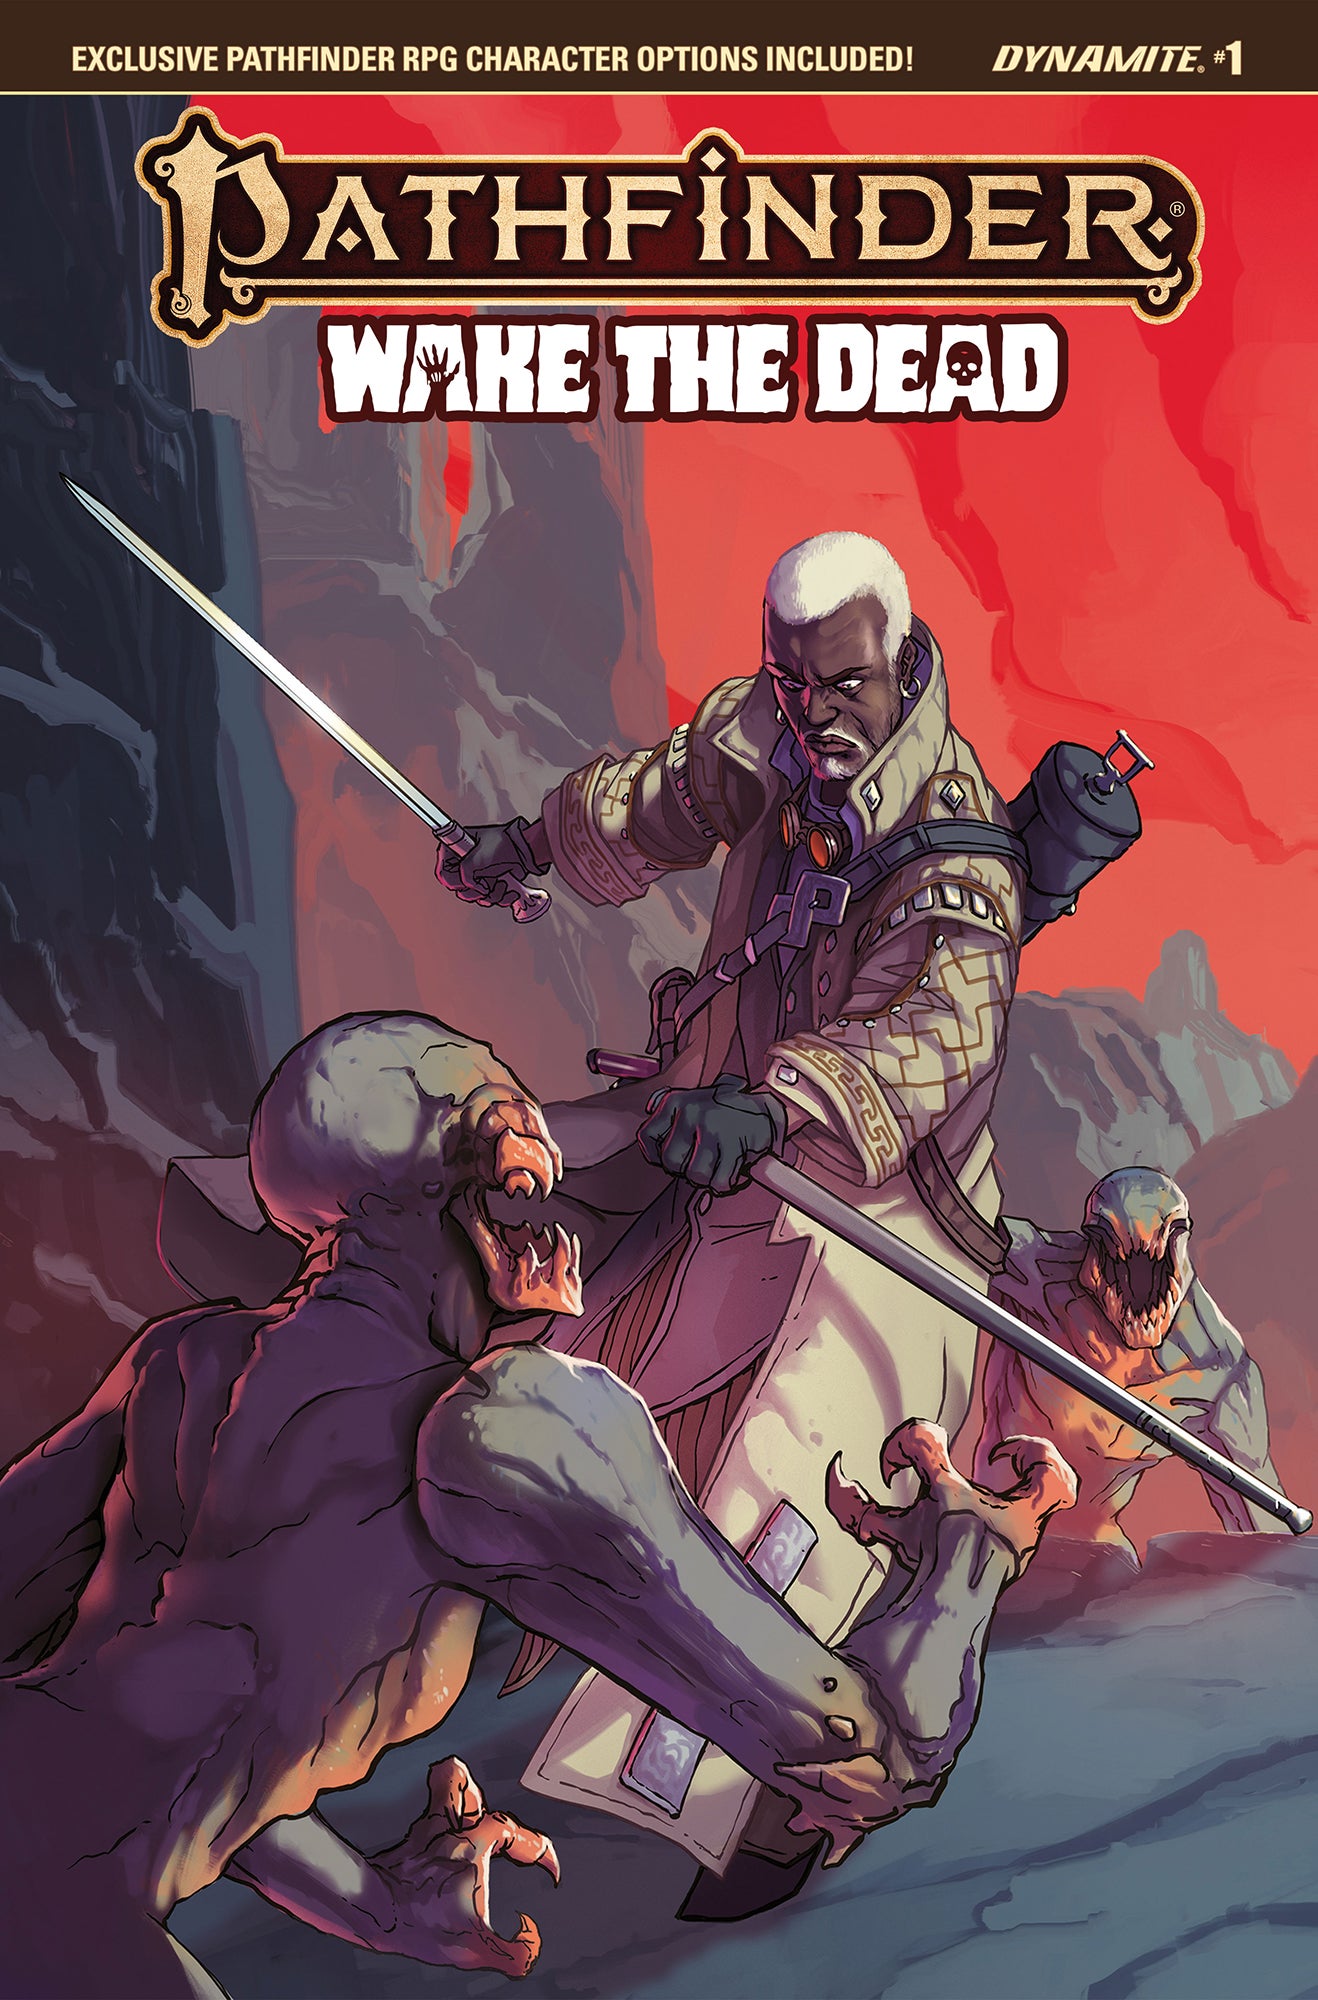 Pathfinder Wake The Dead by Dynamite comics : Quinn the iconic investigator fends off two undead with a sword in each hand 